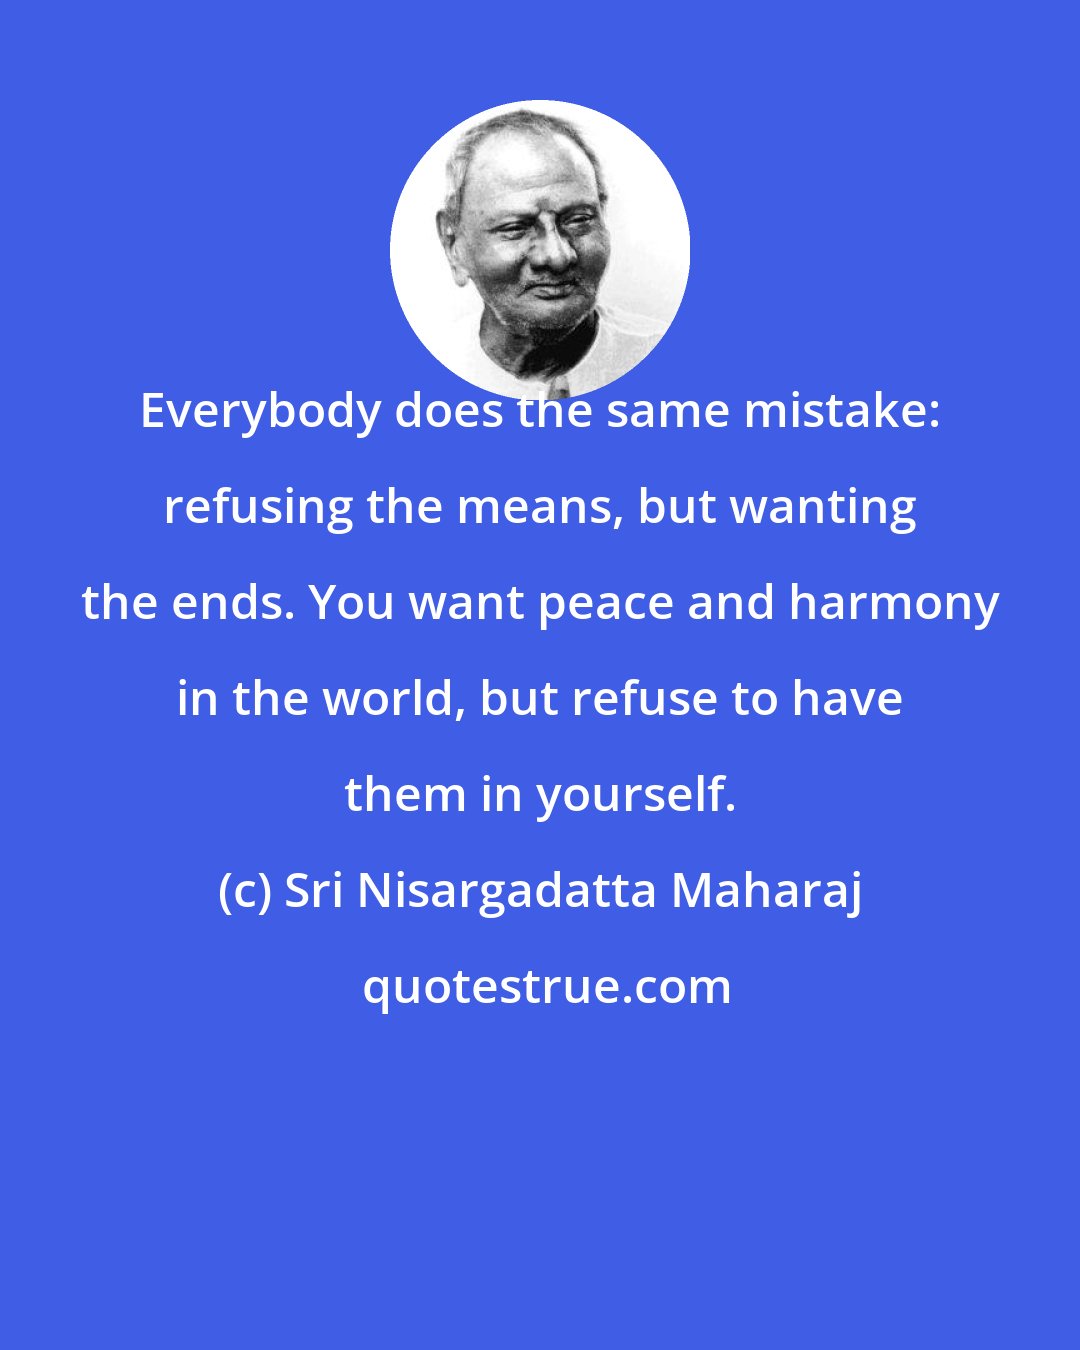 Sri Nisargadatta Maharaj: Everybody does the same mistake: refusing the means, but wanting the ends. You want peace and harmony in the world, but refuse to have them in yourself.